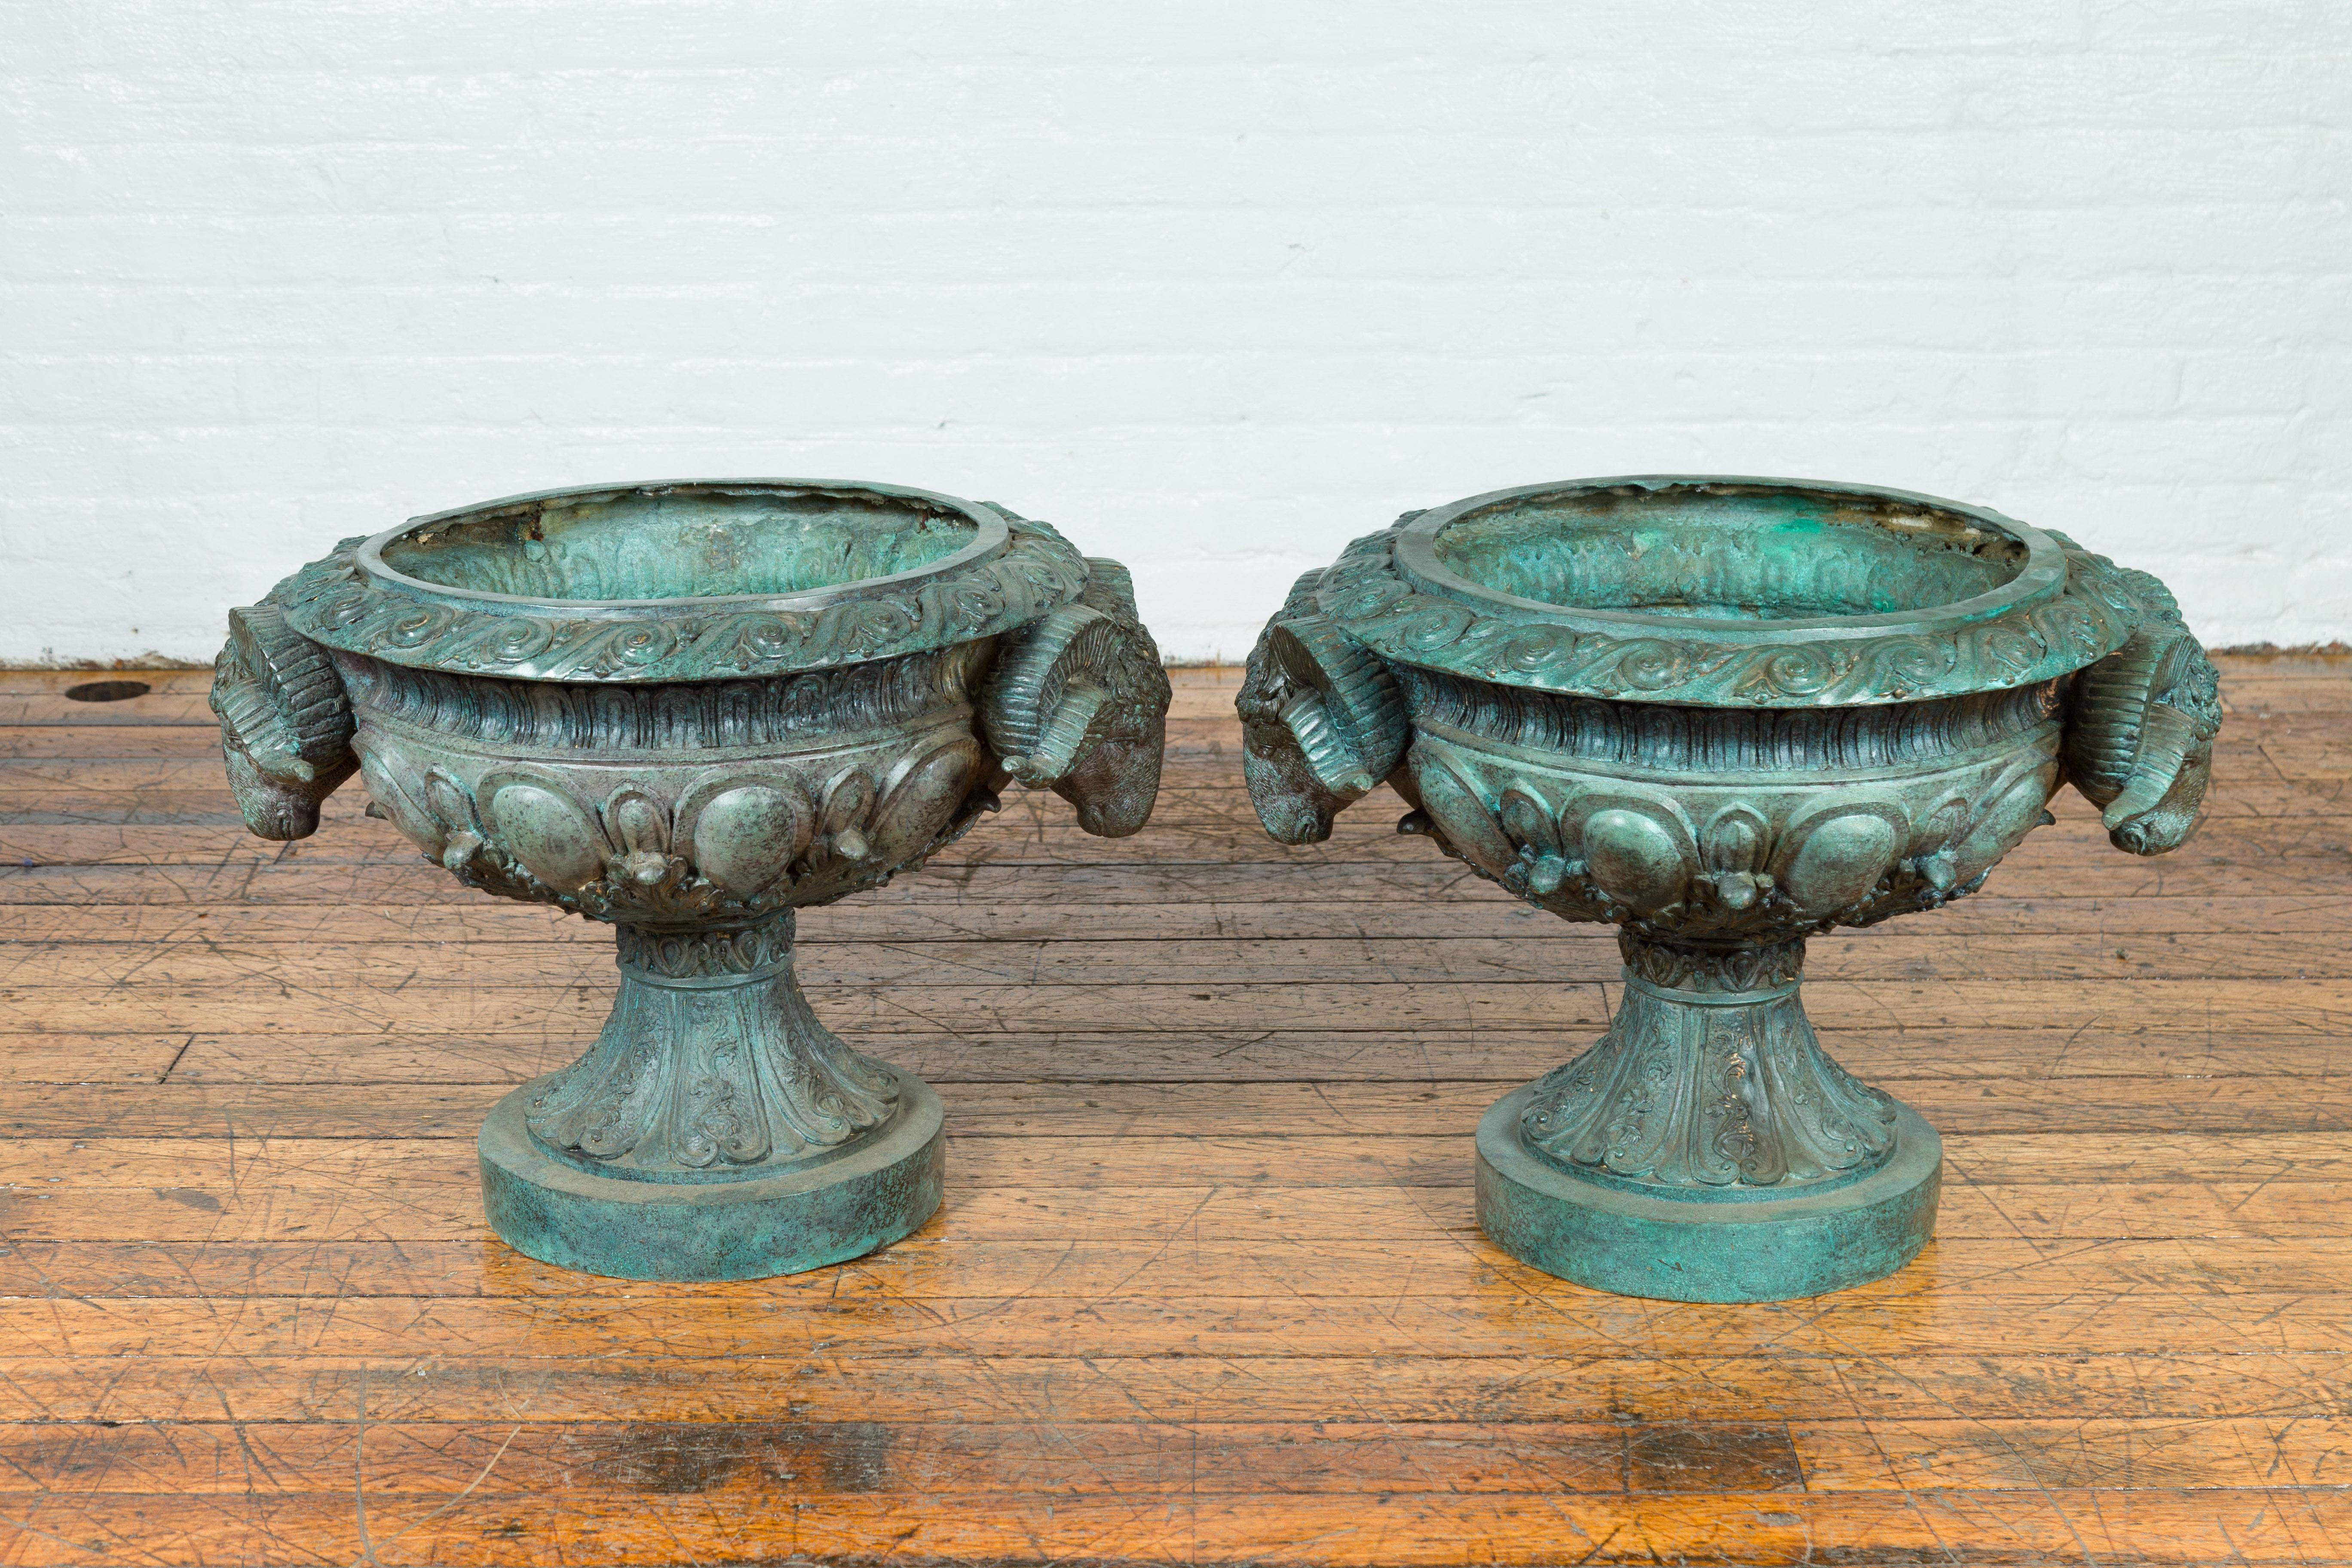 20th Century Greco Roman Style Vintage Verde Patina Bronze Urns with Rams' Heads, Sold Each